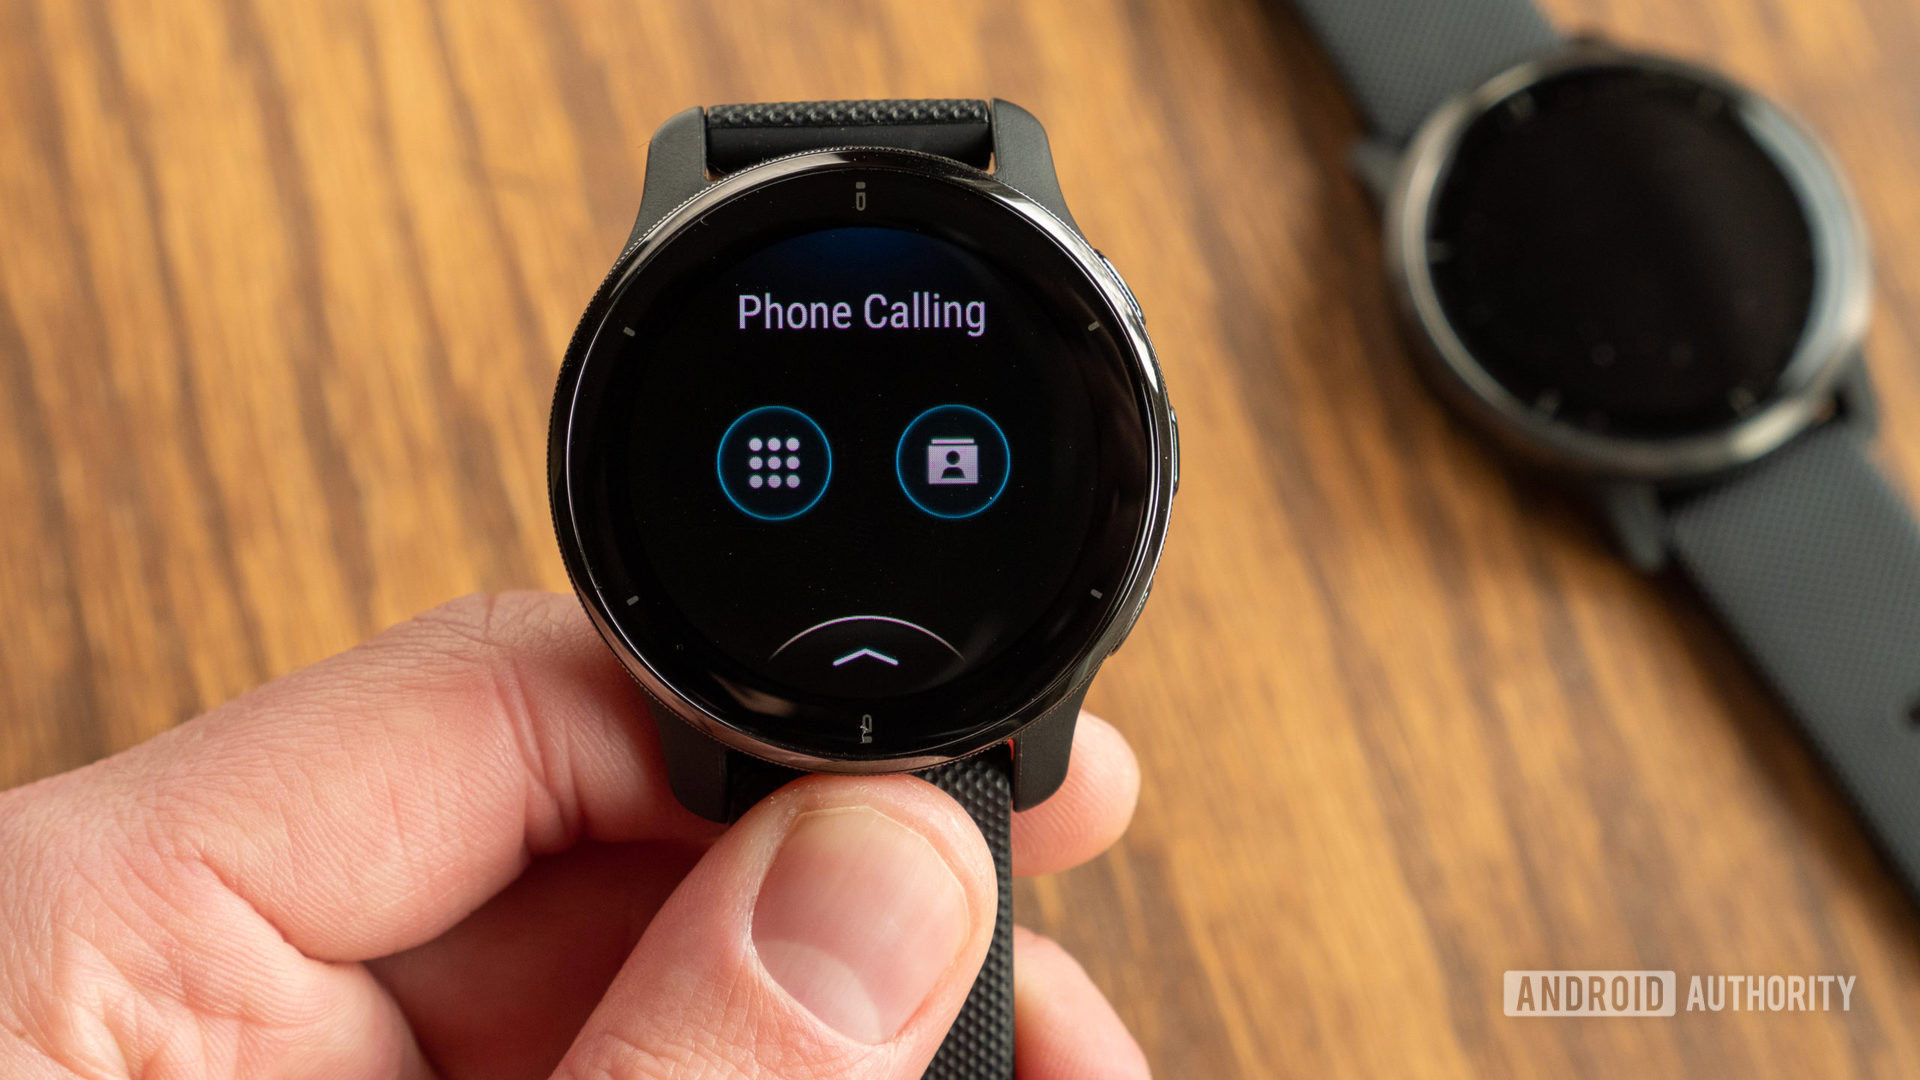 Garmin Venu 2 Plus Review: The All-Around Fitness and Smart Watch - CNET